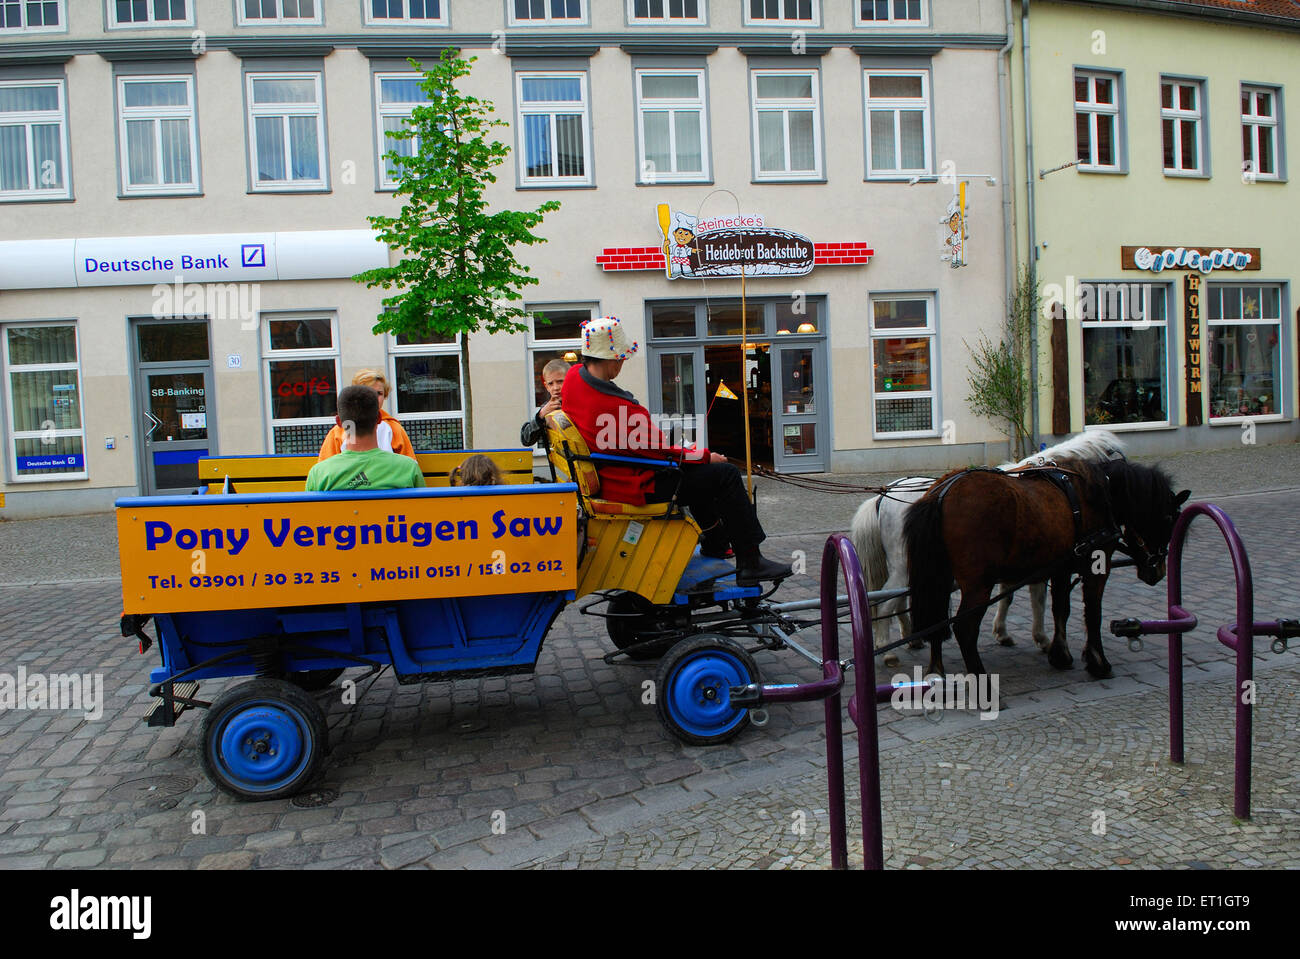 Pony driven cart carrying people ; Germany Stock Photo